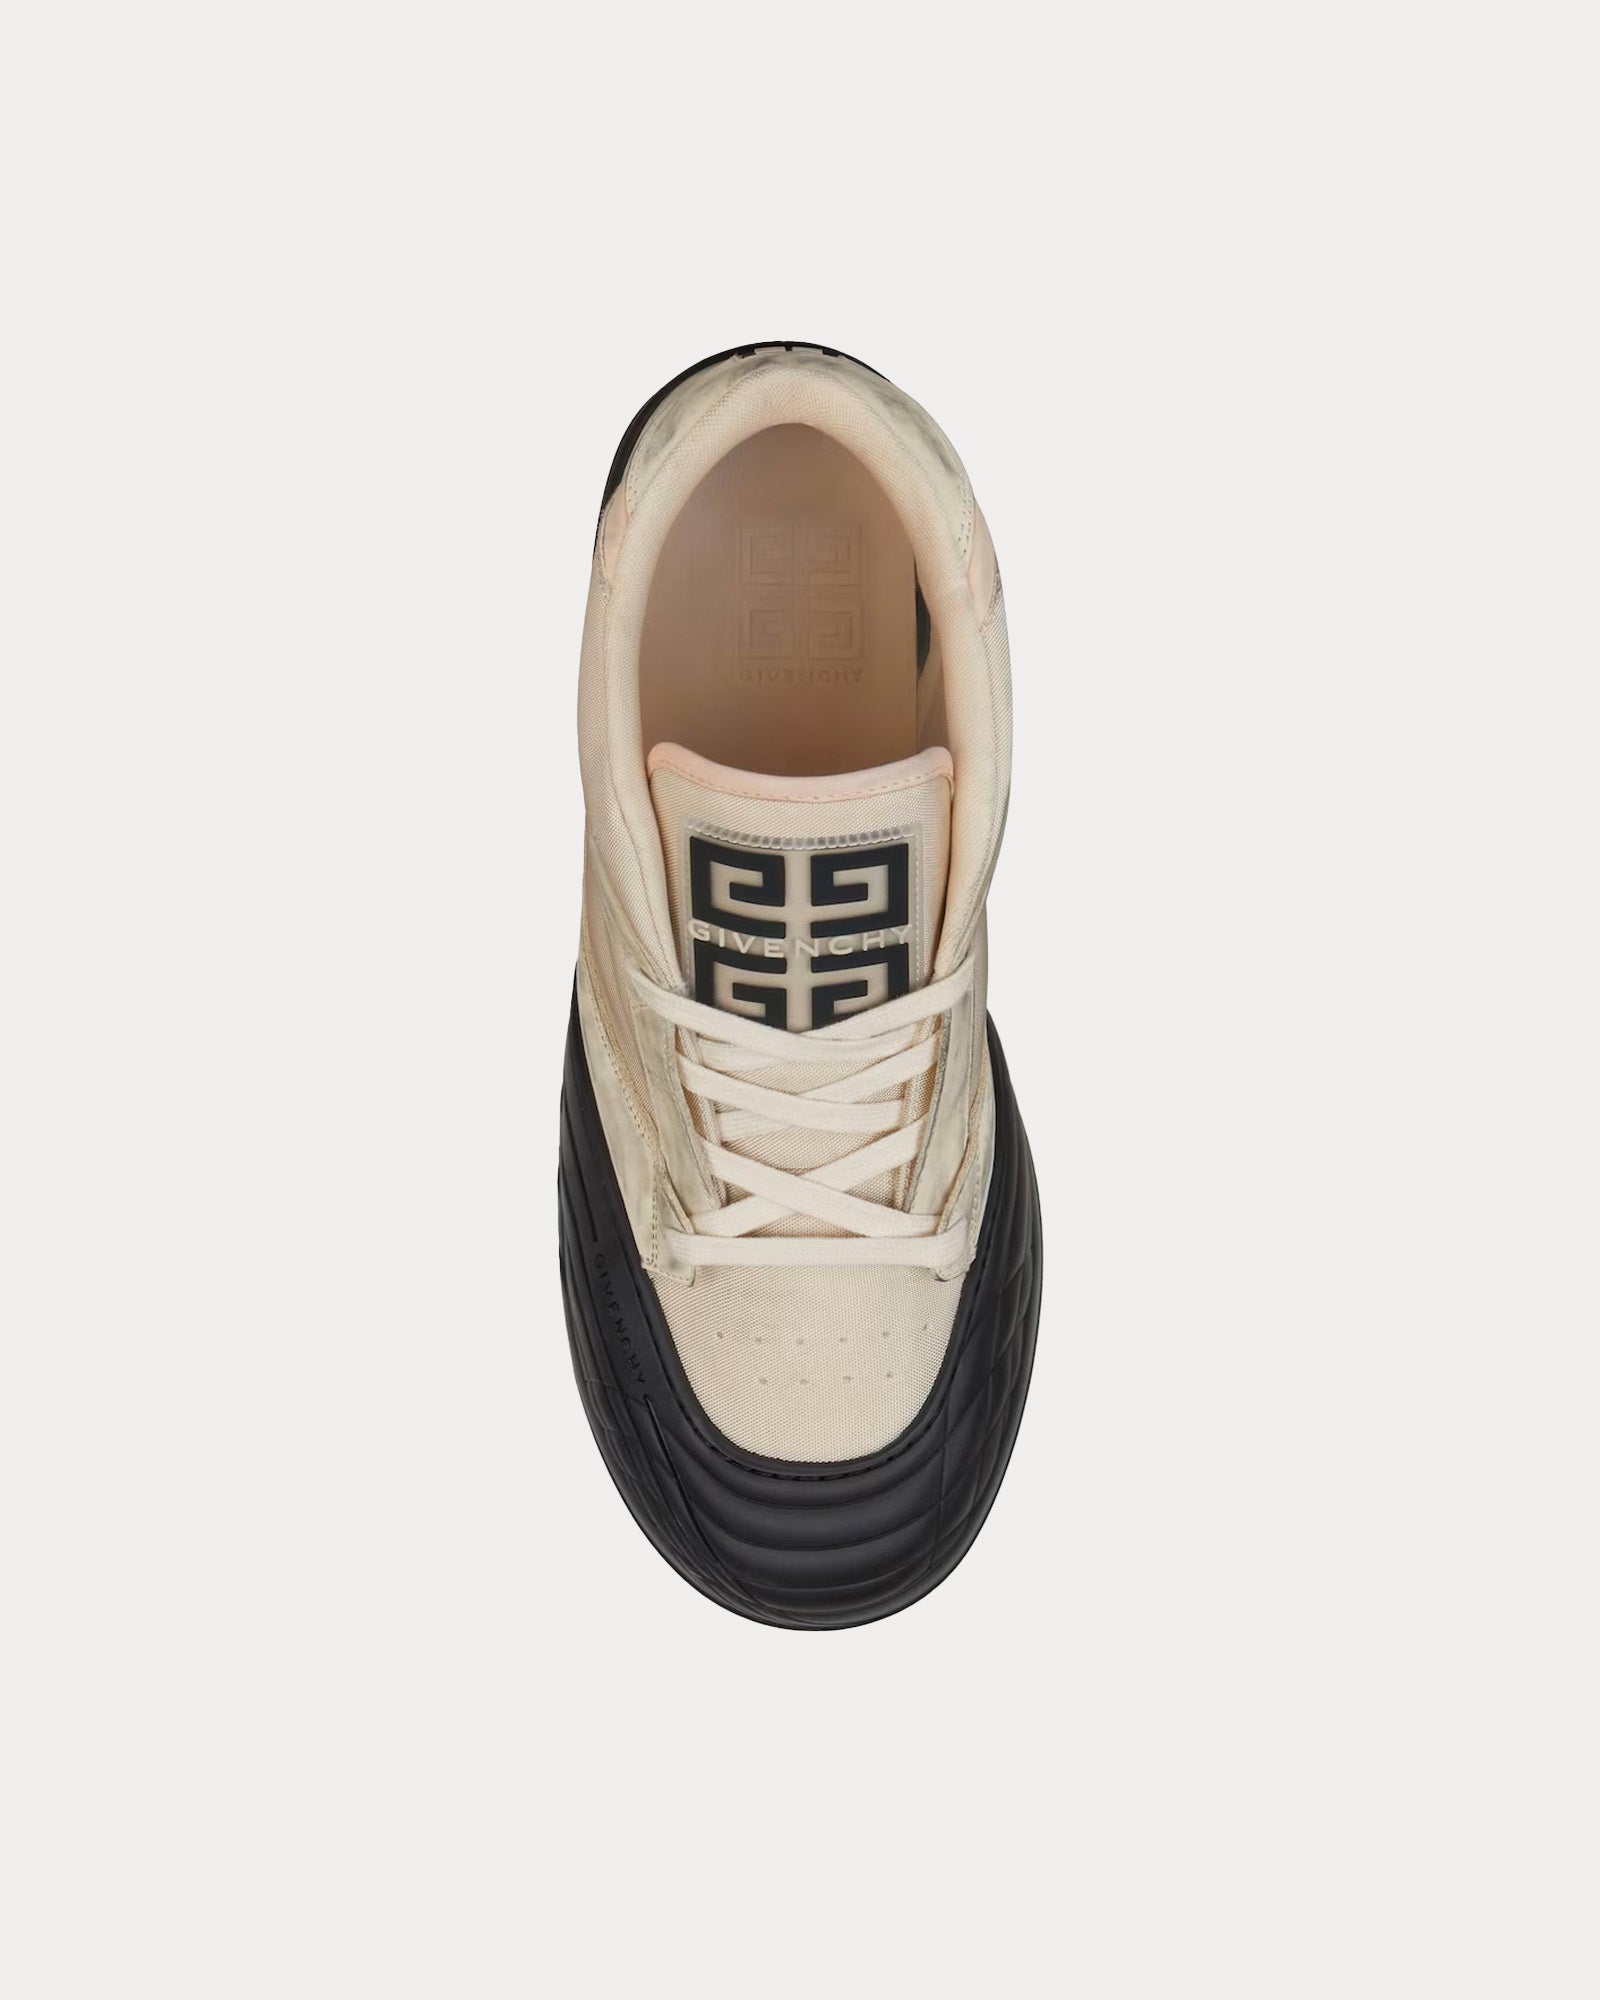 Givenchy - Skate Nubuck & Synthetic Fiber White Mid Top Sneakers